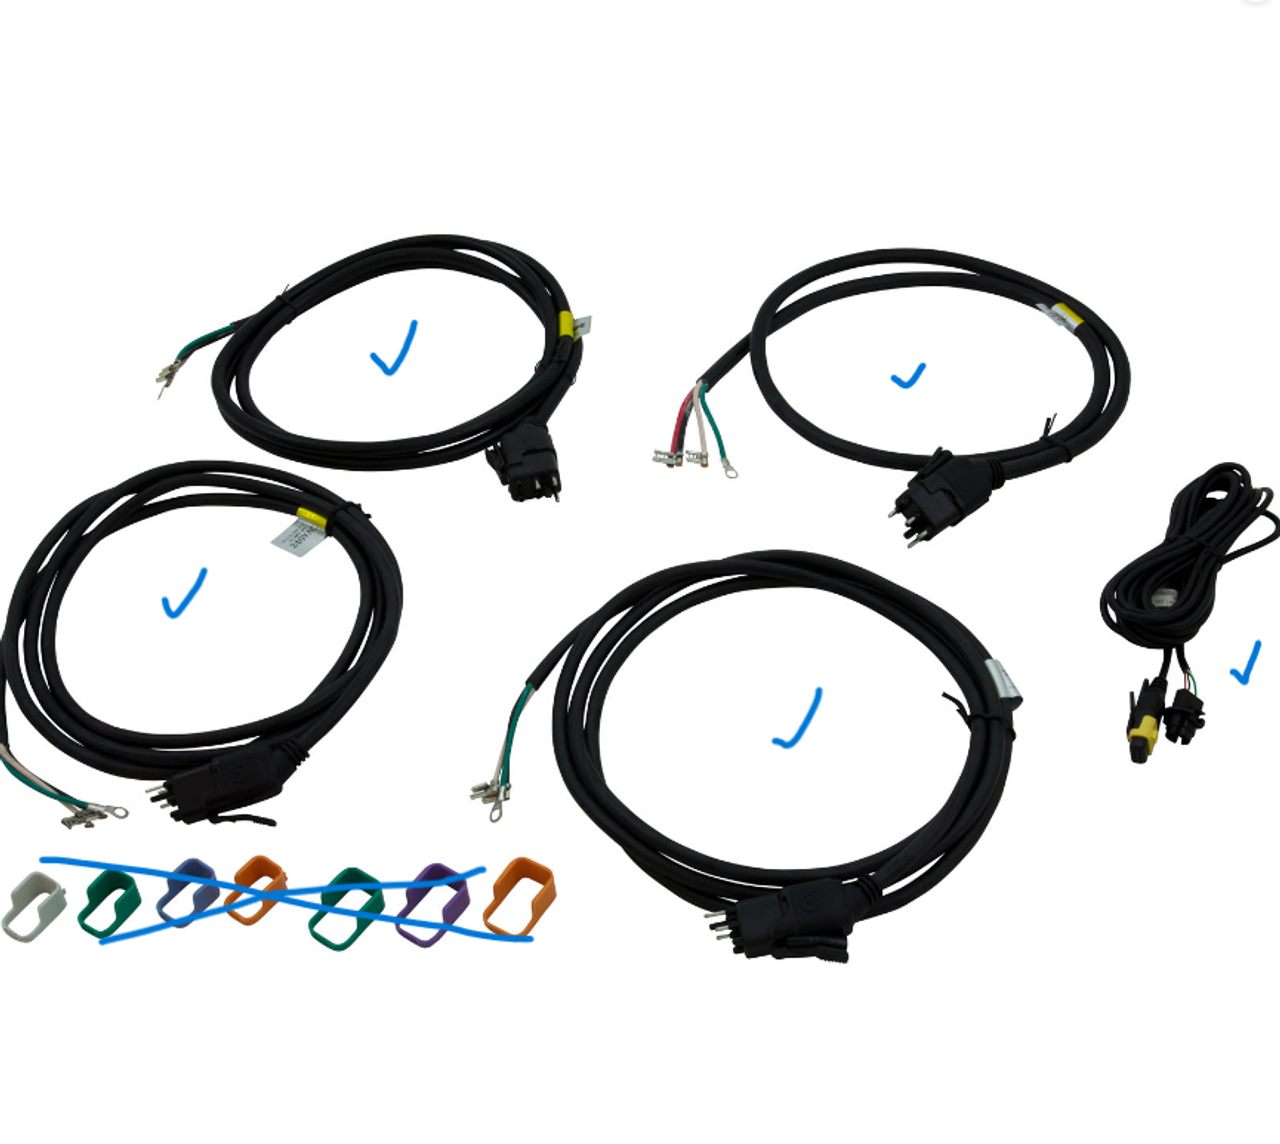 Gecko 5 Cable Kit IN.LINK 240V 9920-101436 Cord Set